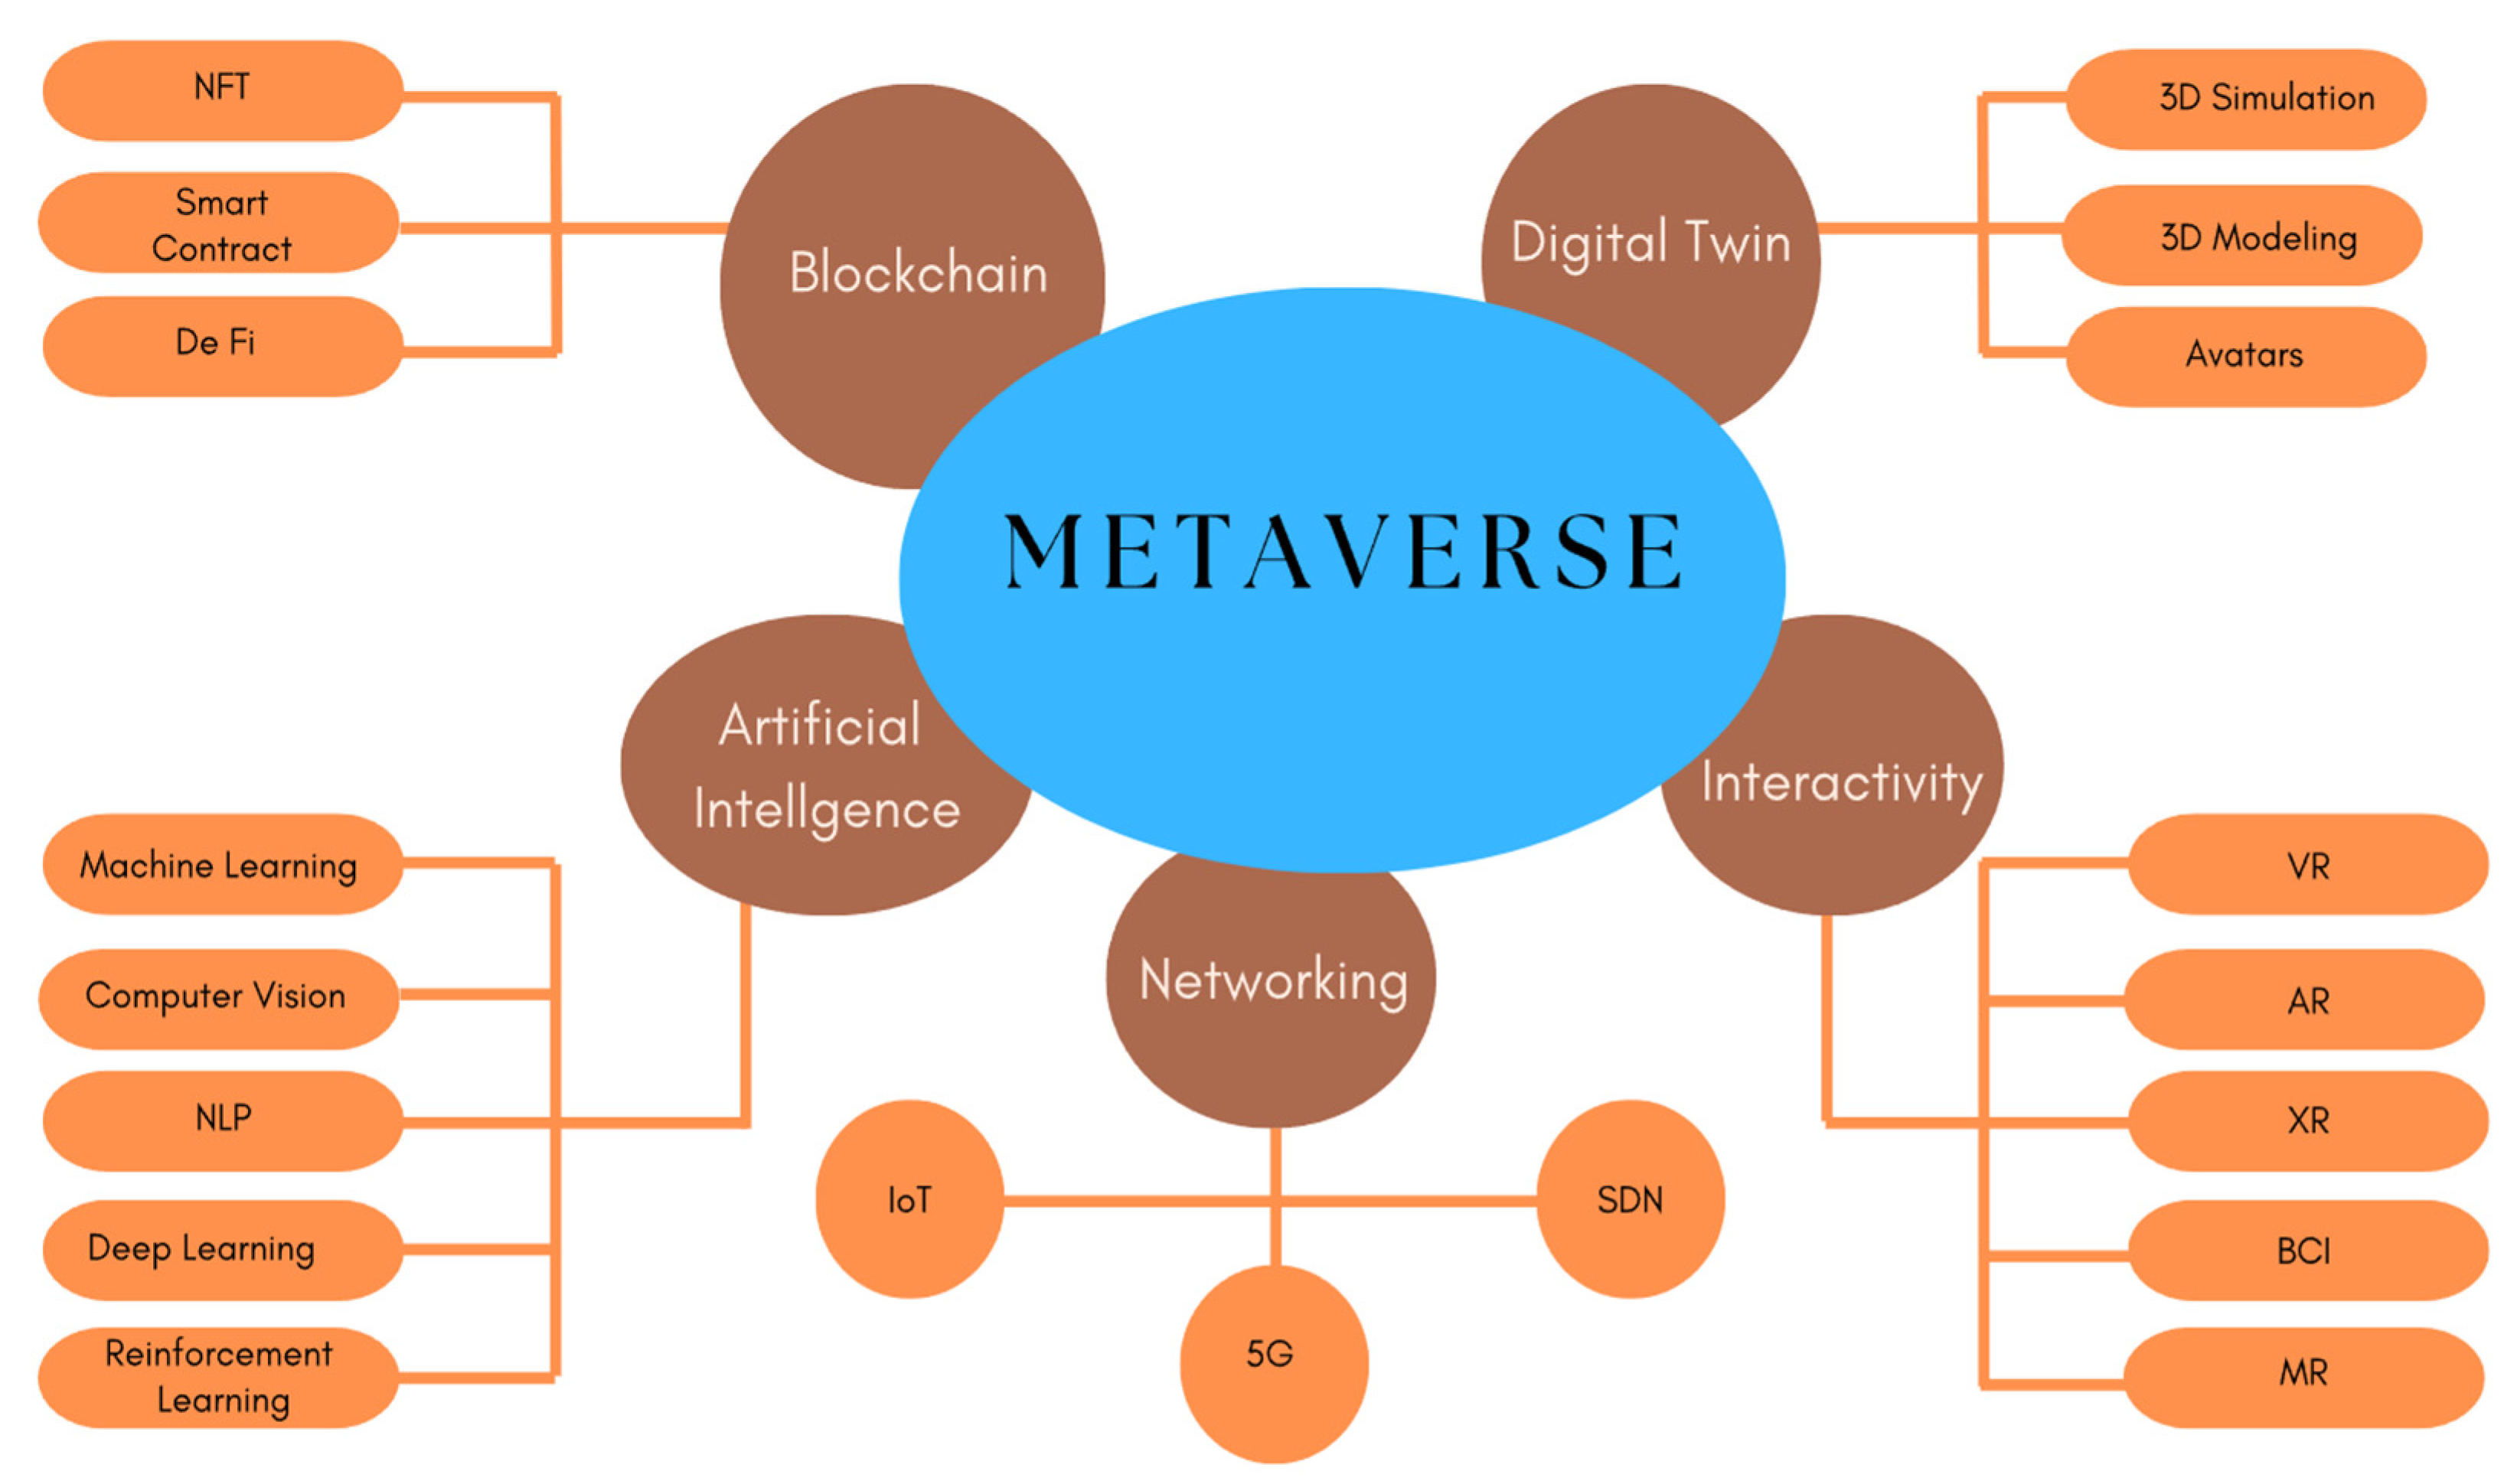 Facebook-owner Meta shows future applications of metaverse - Times of India